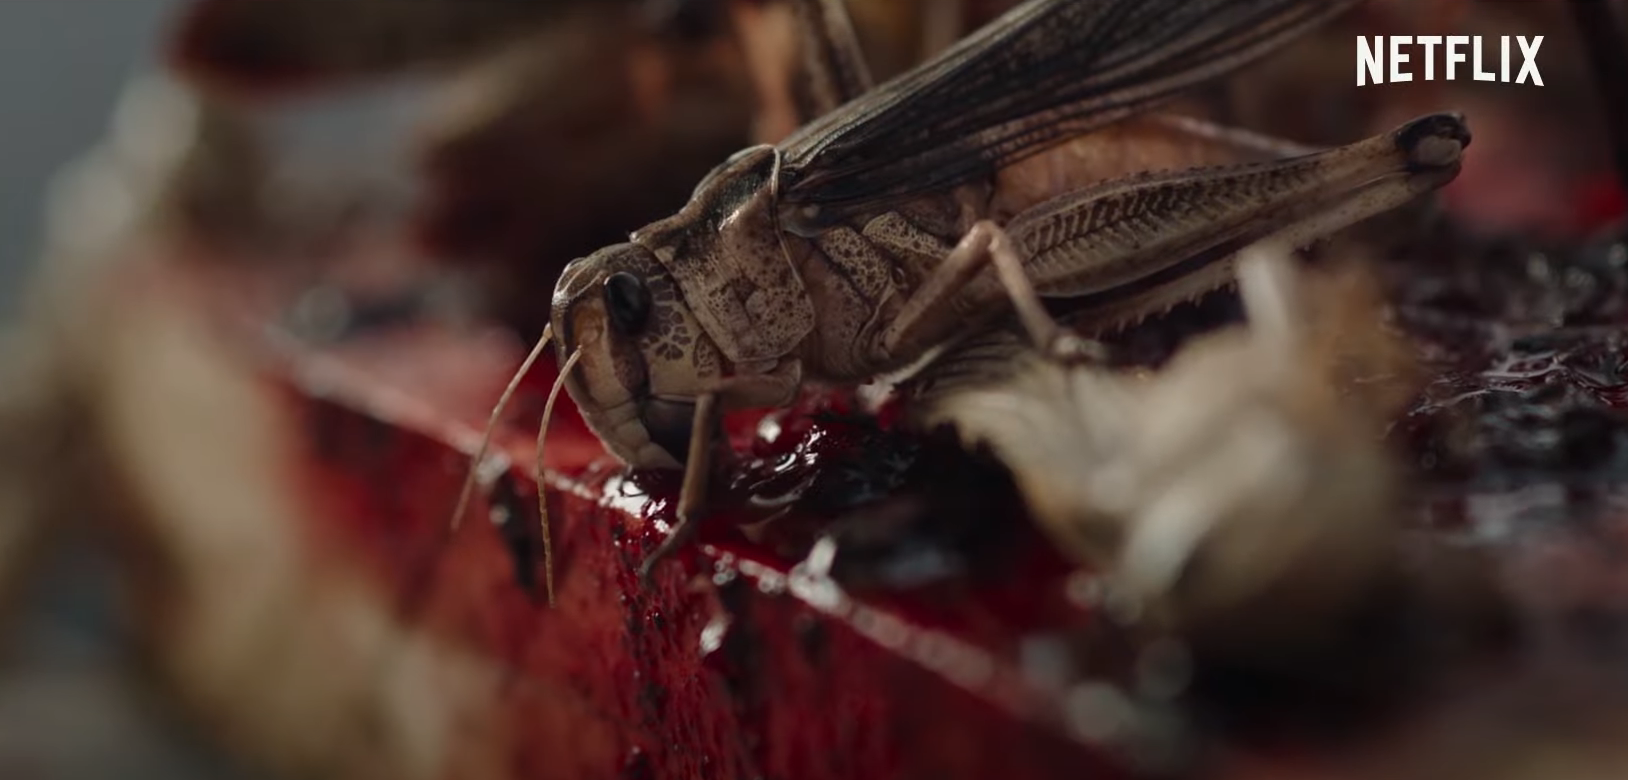 Trailer] Netflix Unleashes Bloodsucking Locusts in French Horror Movie 'The  Swarm' - Bloody Disgusting